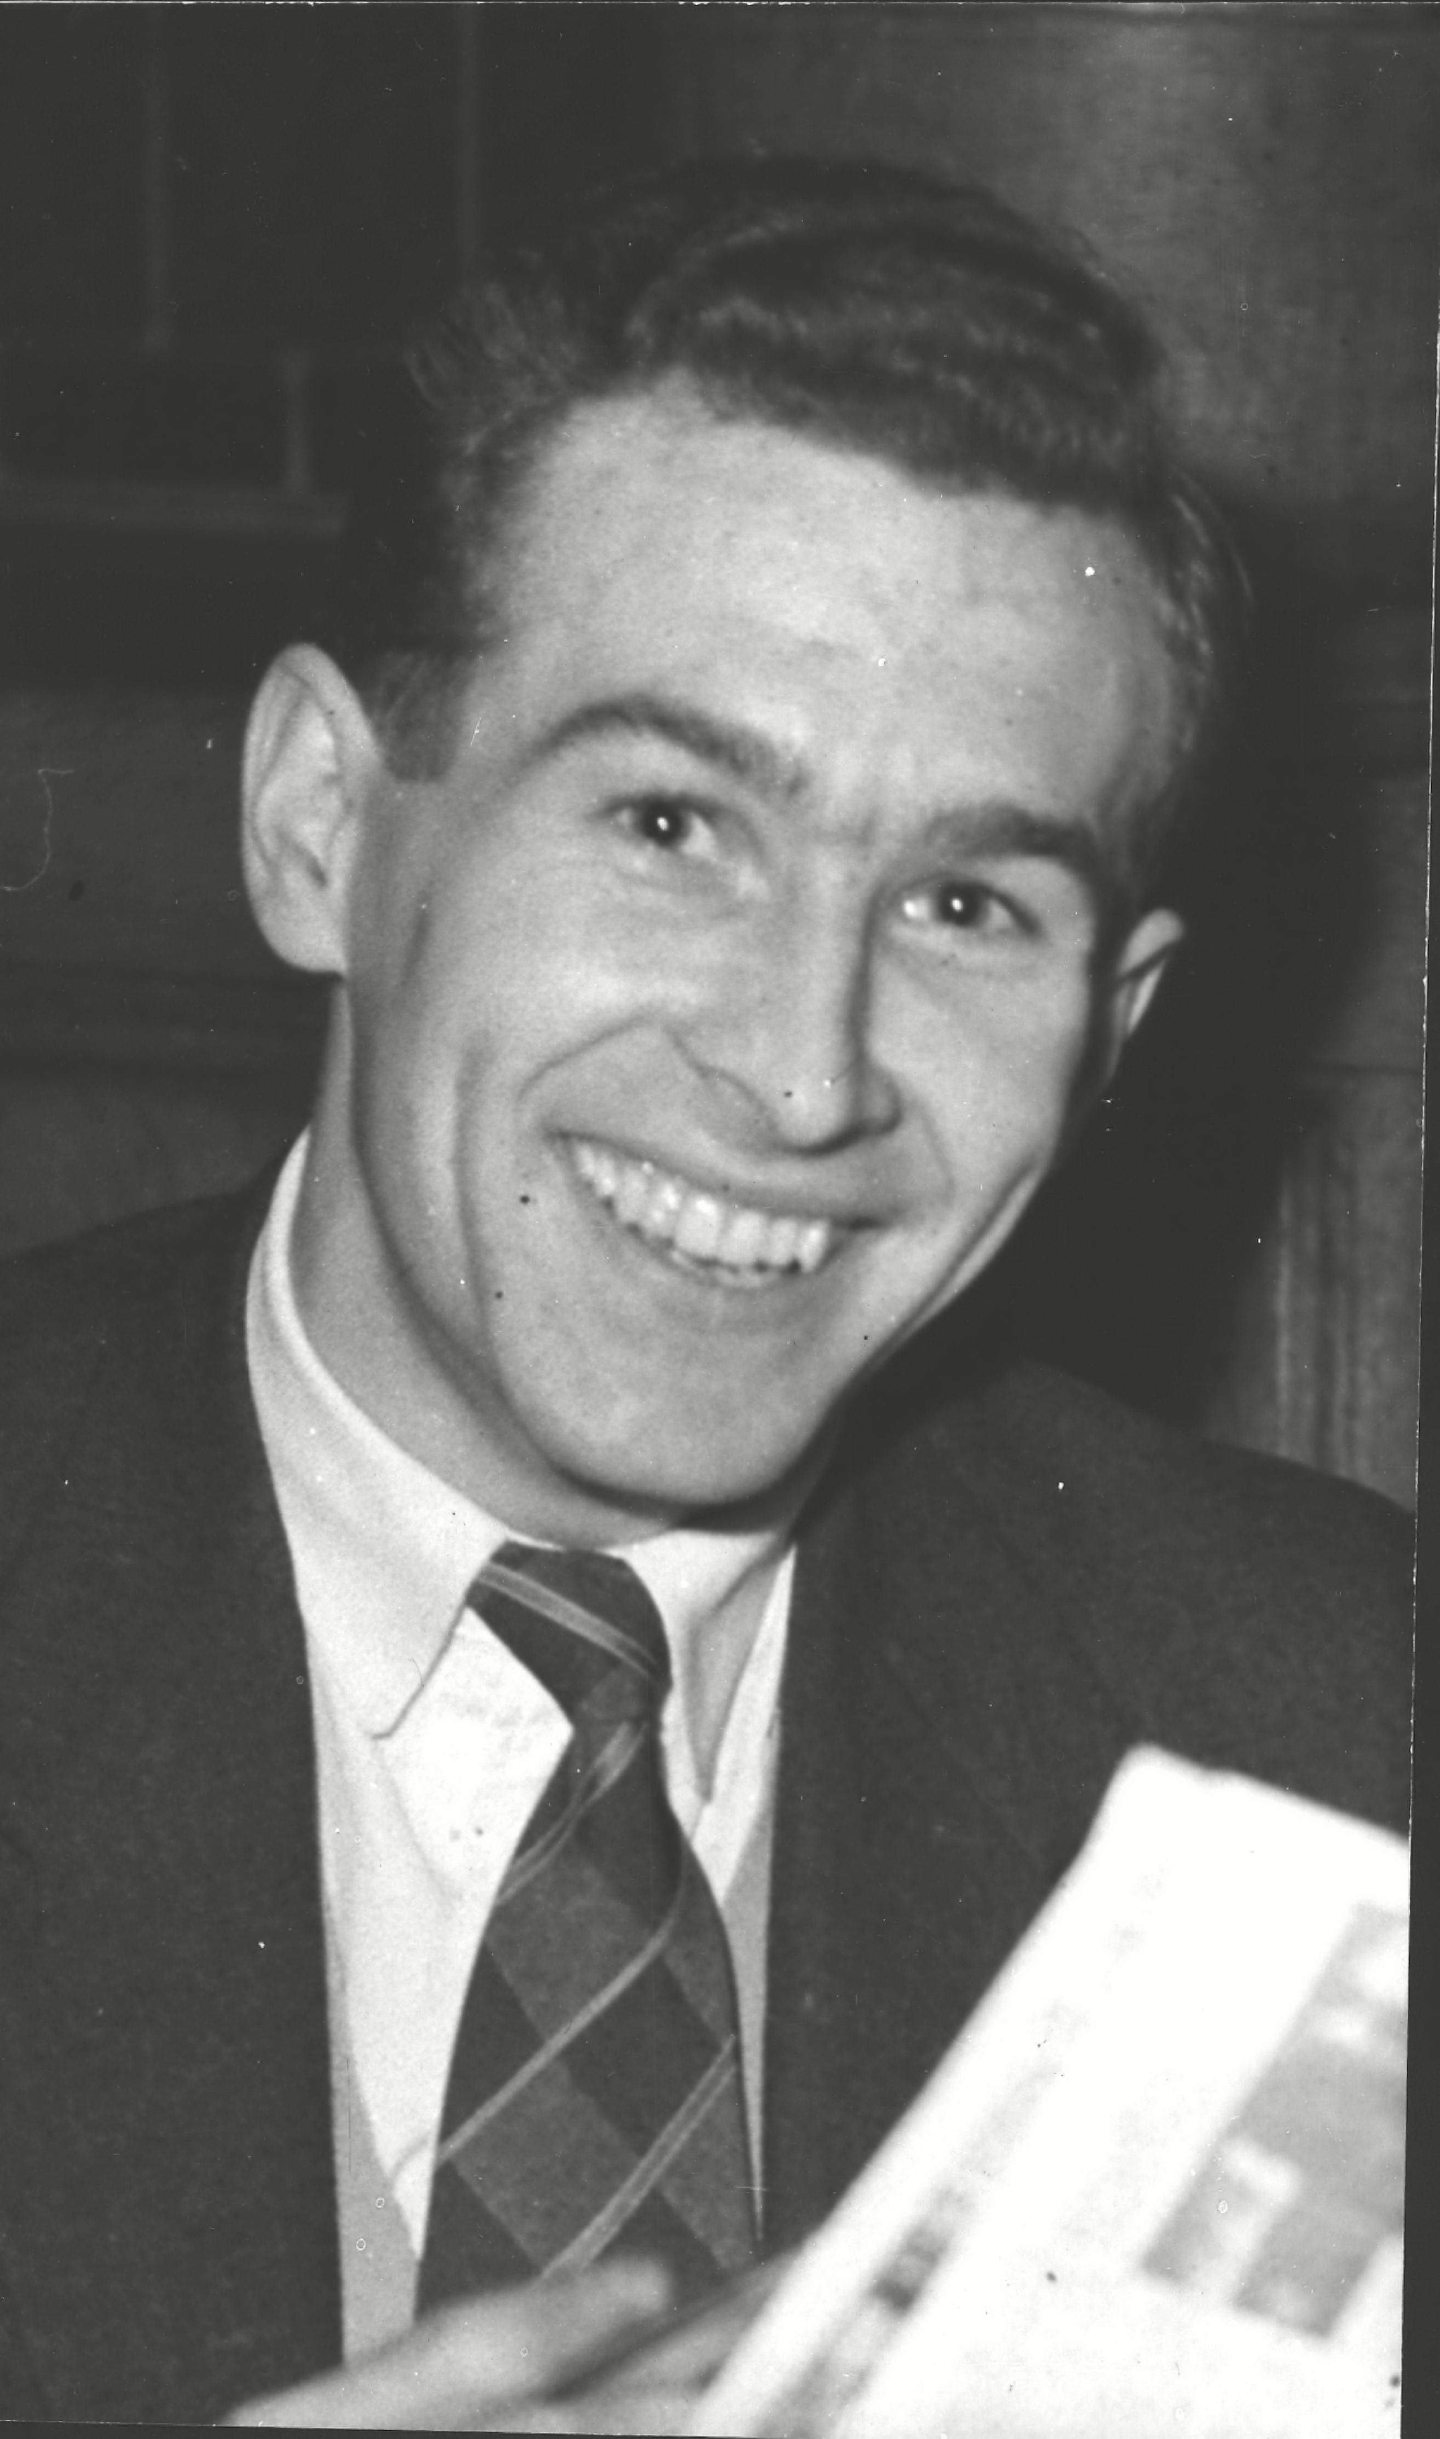 Bobby Wishart during his time as an Aberdeen player.